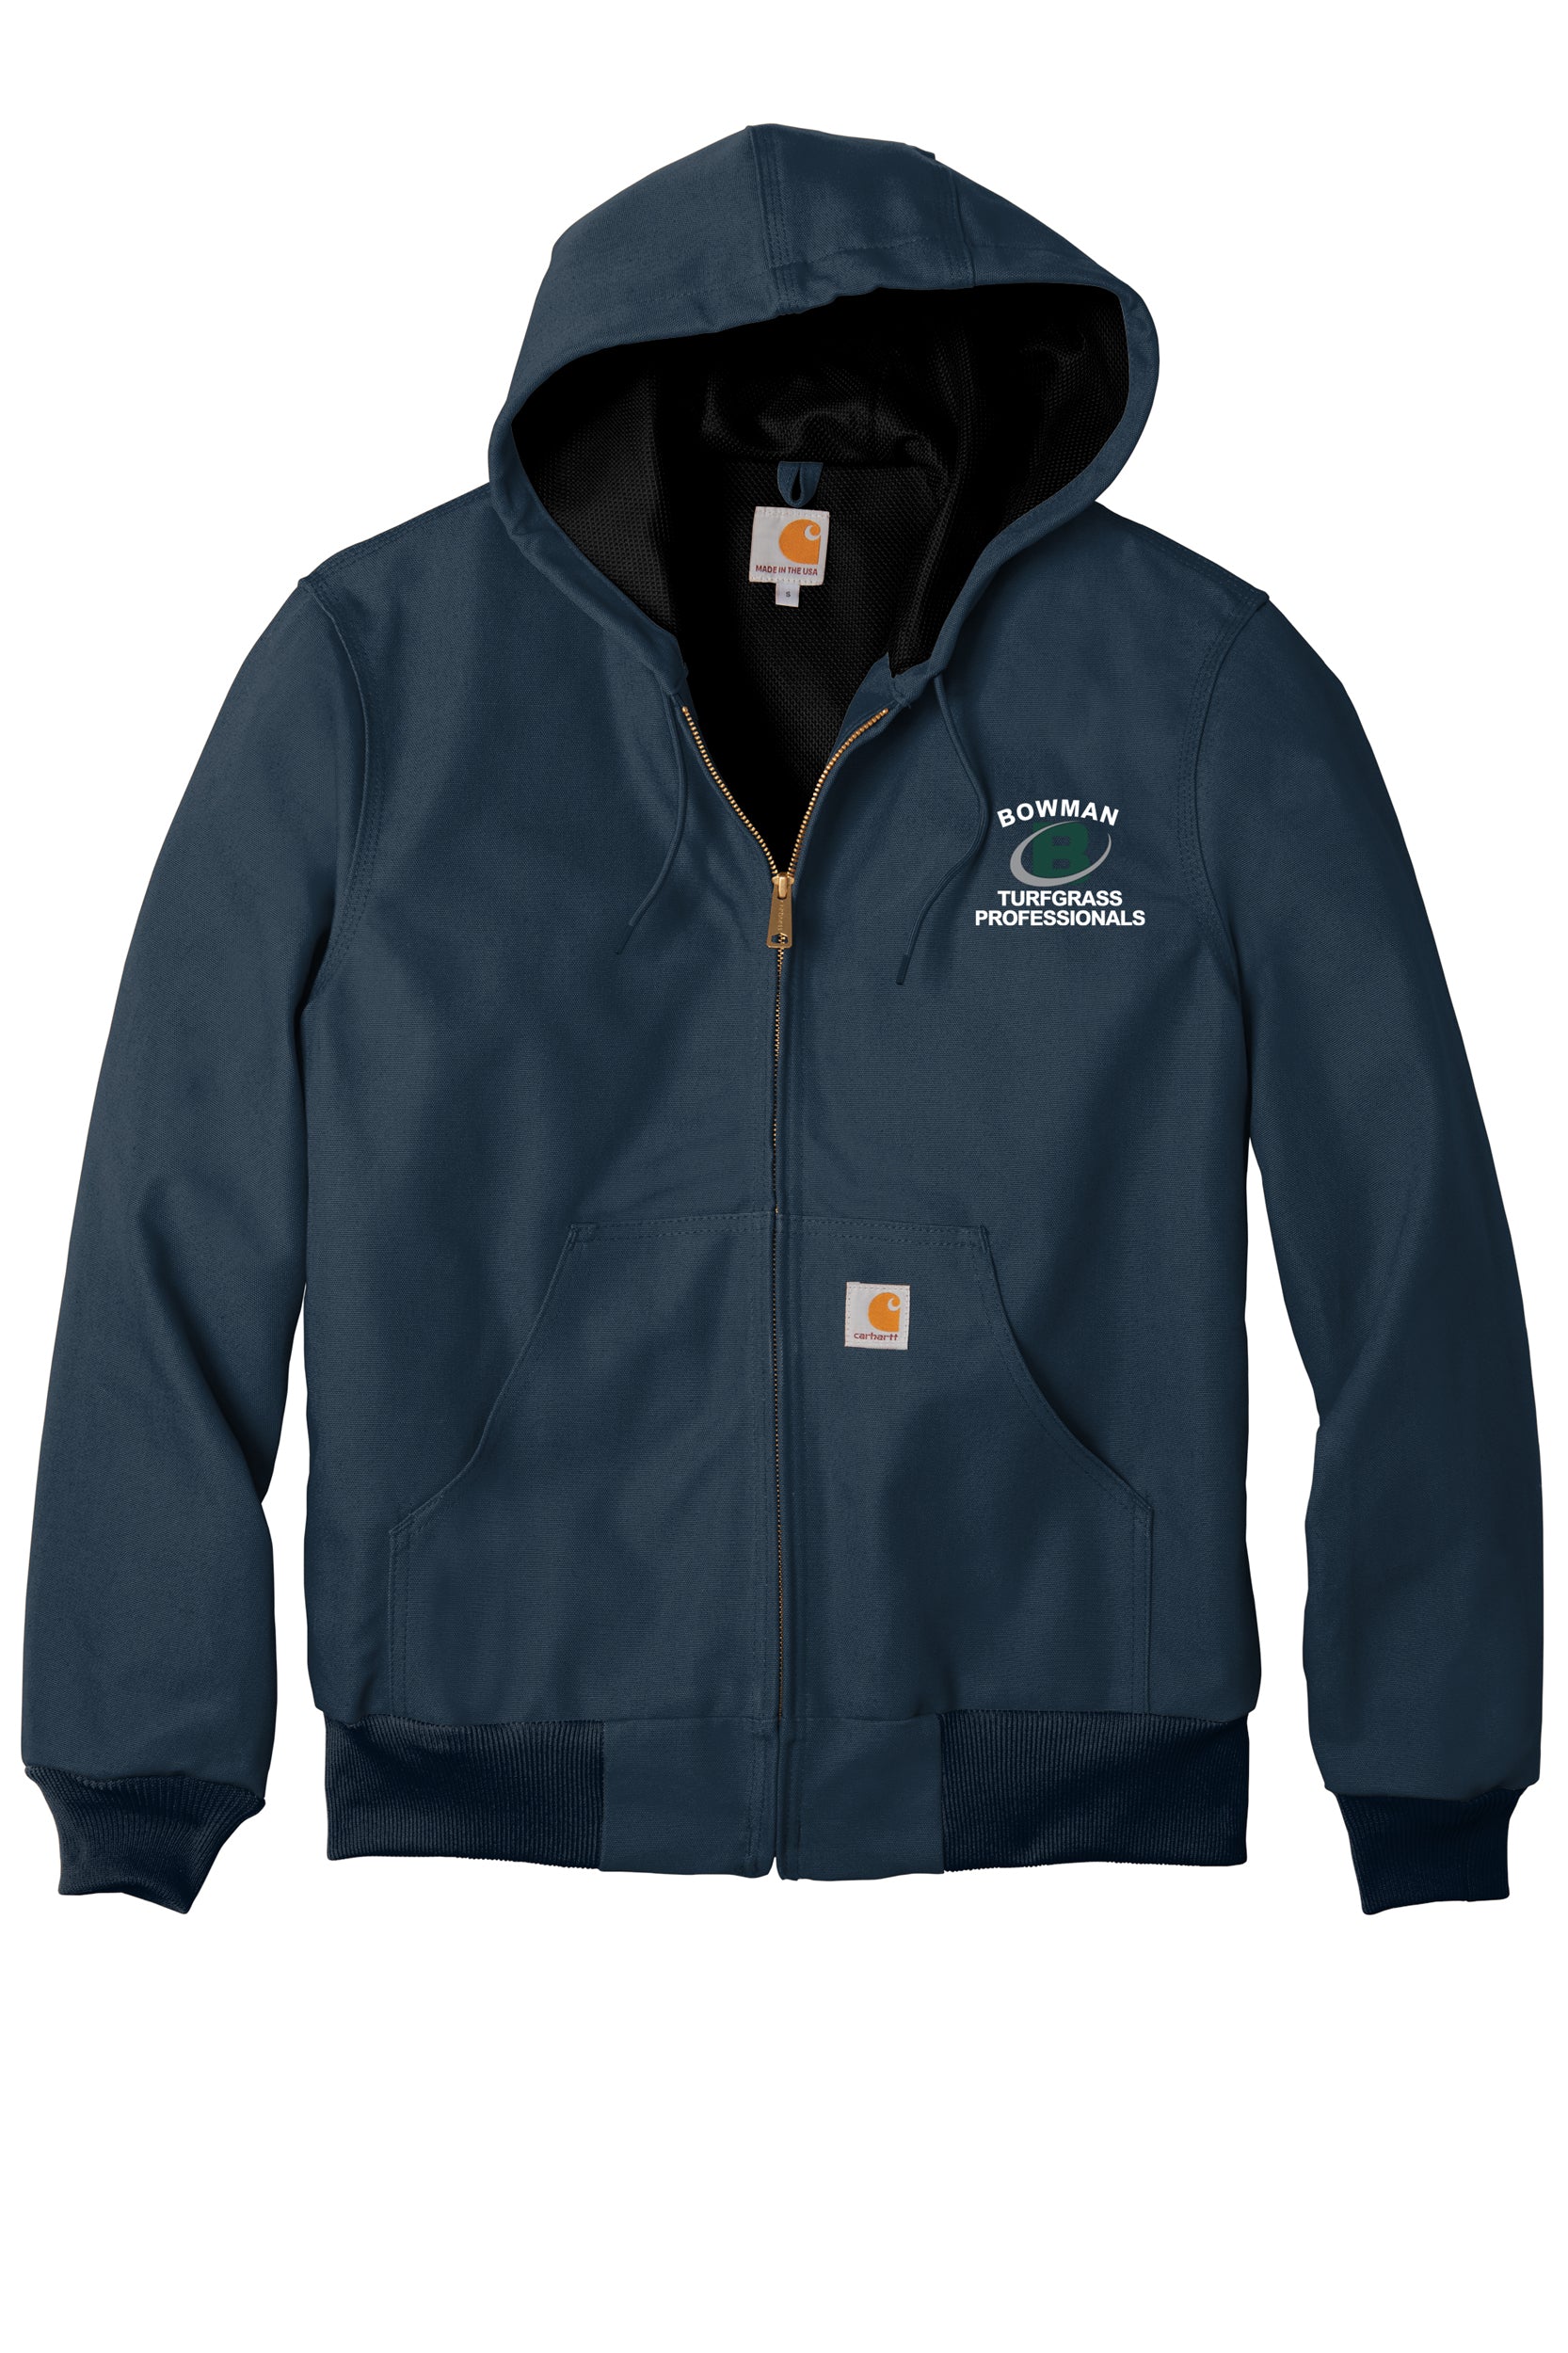 Bowman Turfgrass Professionals - Carhartt Thermal-Lined Duck Active Jacket